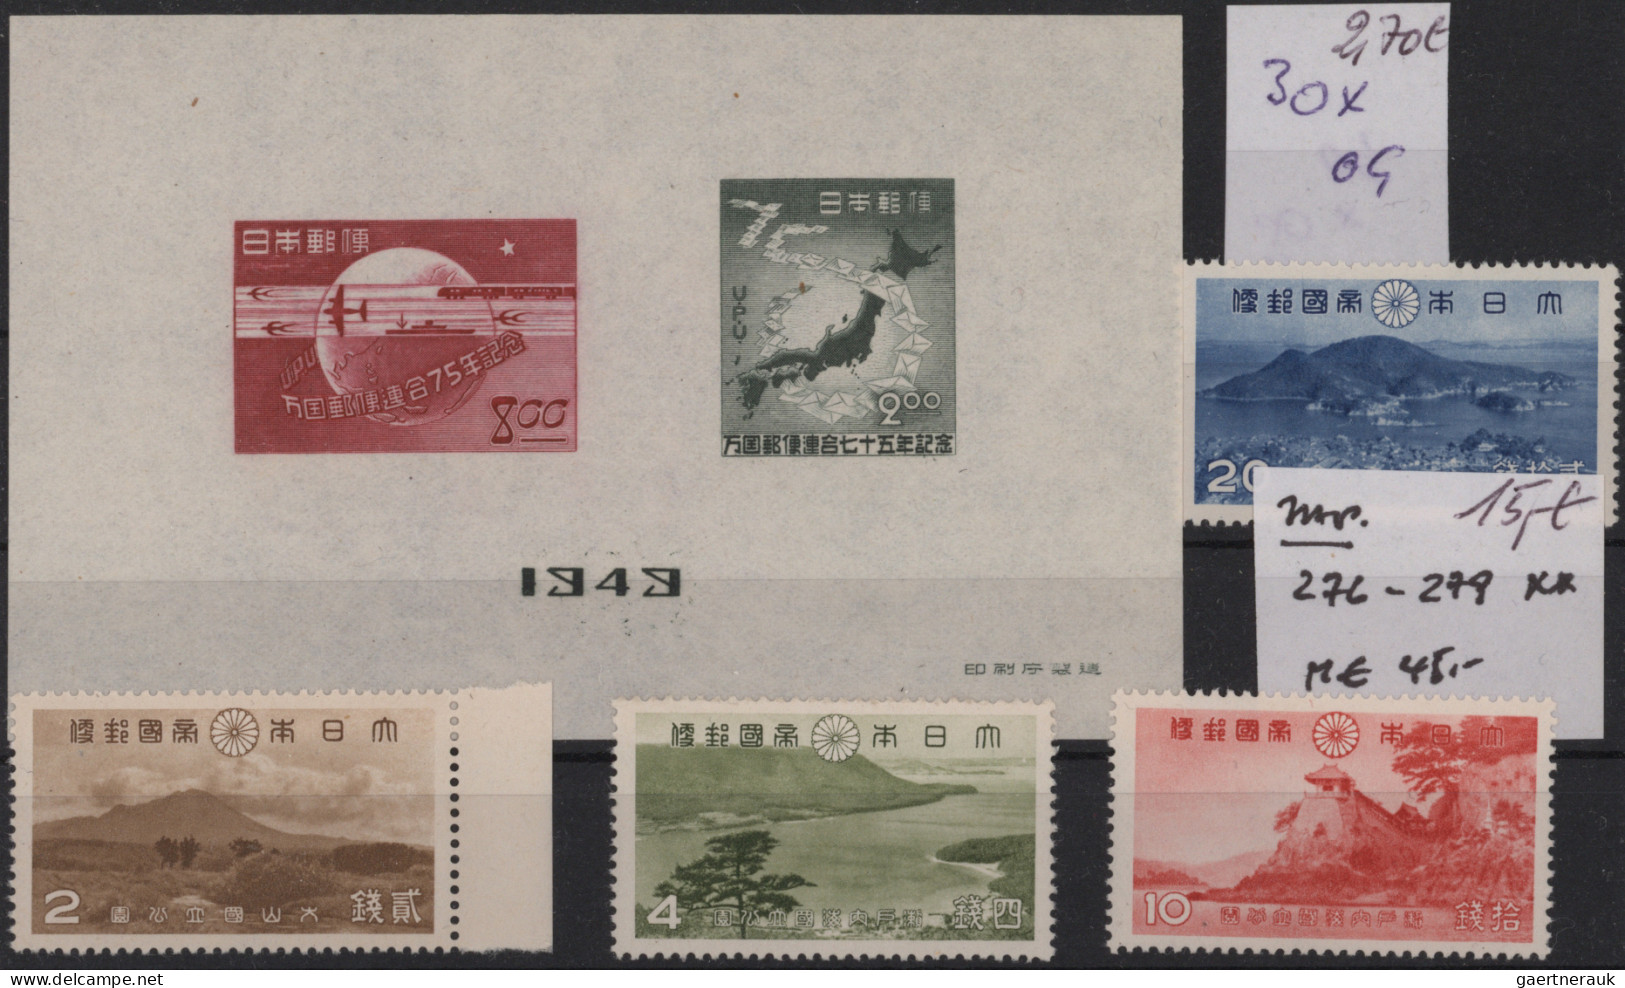 Japan - specialities: 1874/1980 (ca.), MNH MM and used on dealers stockcards and